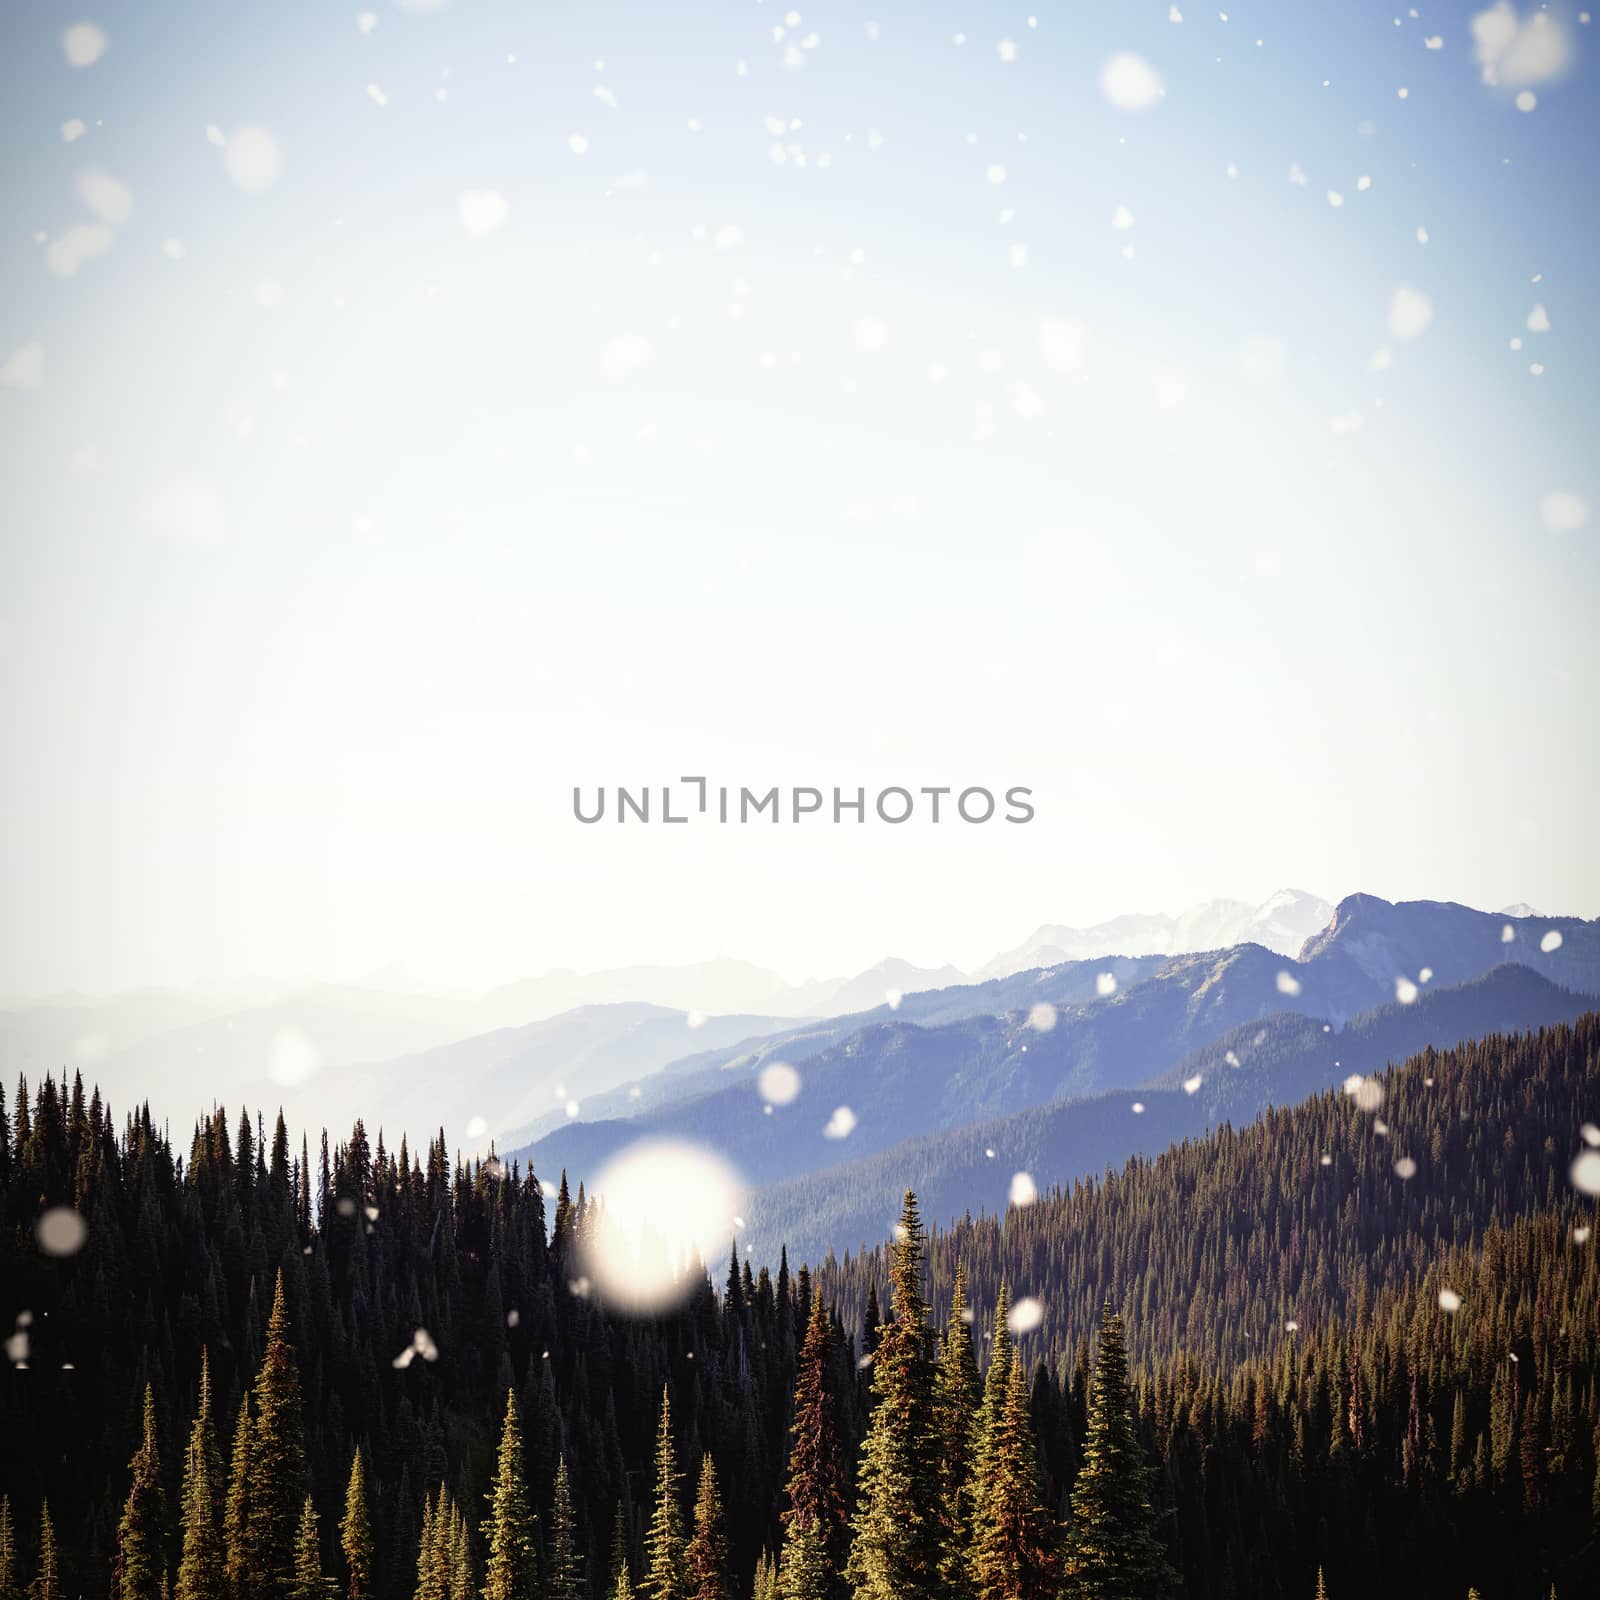 Composite image of snow falling by Wavebreakmedia